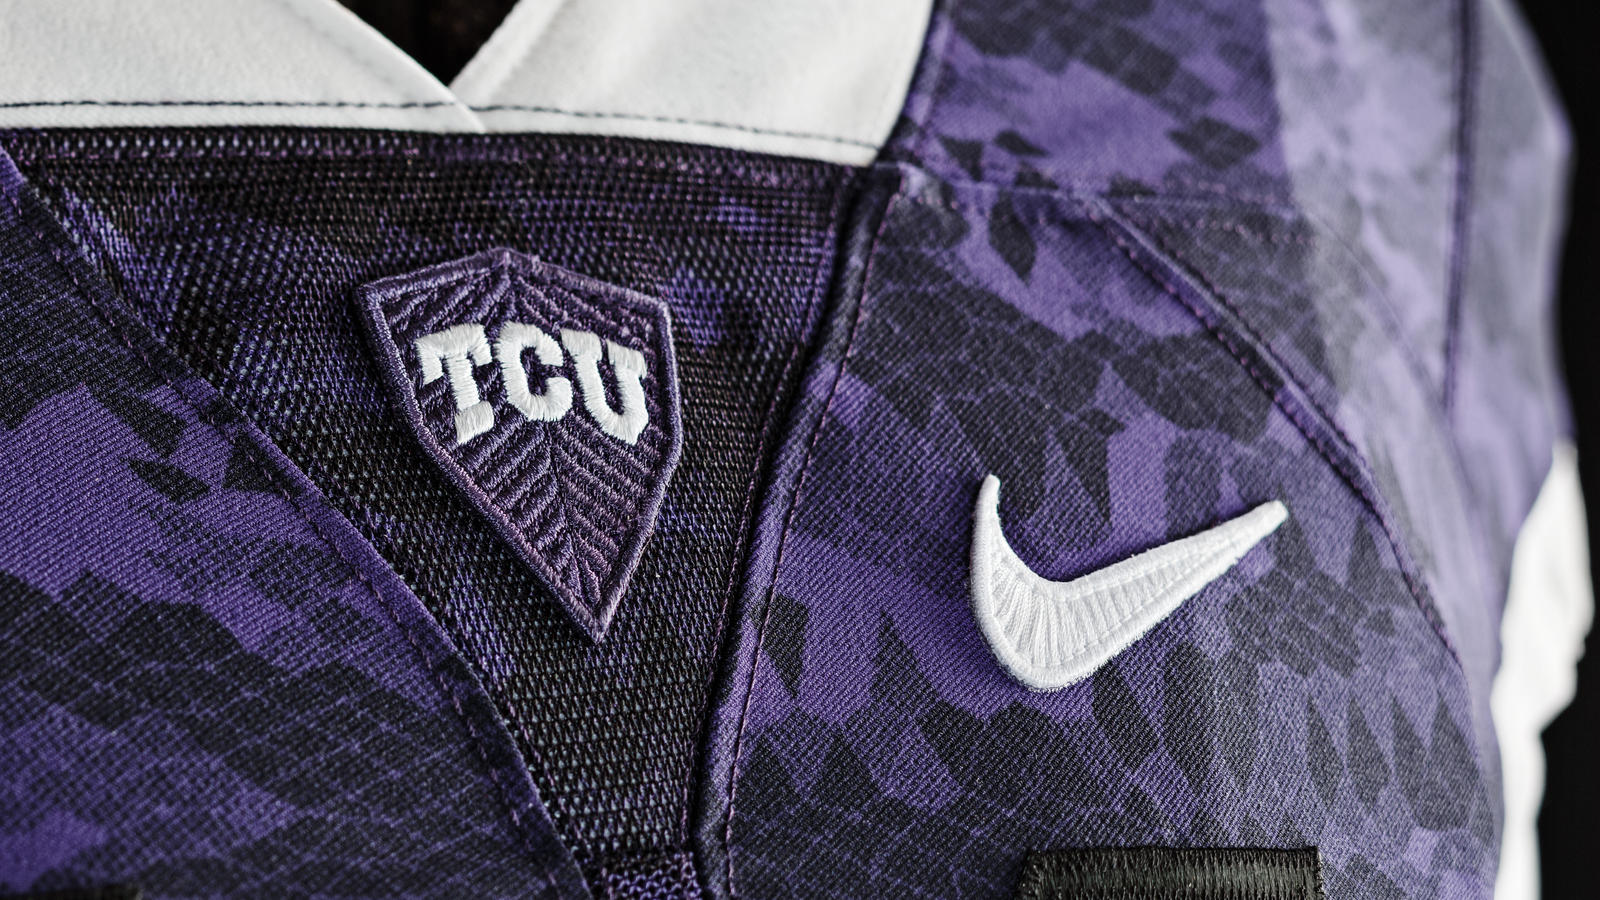 TCU Football Horned Frogs takes uniforms to new level with fresh